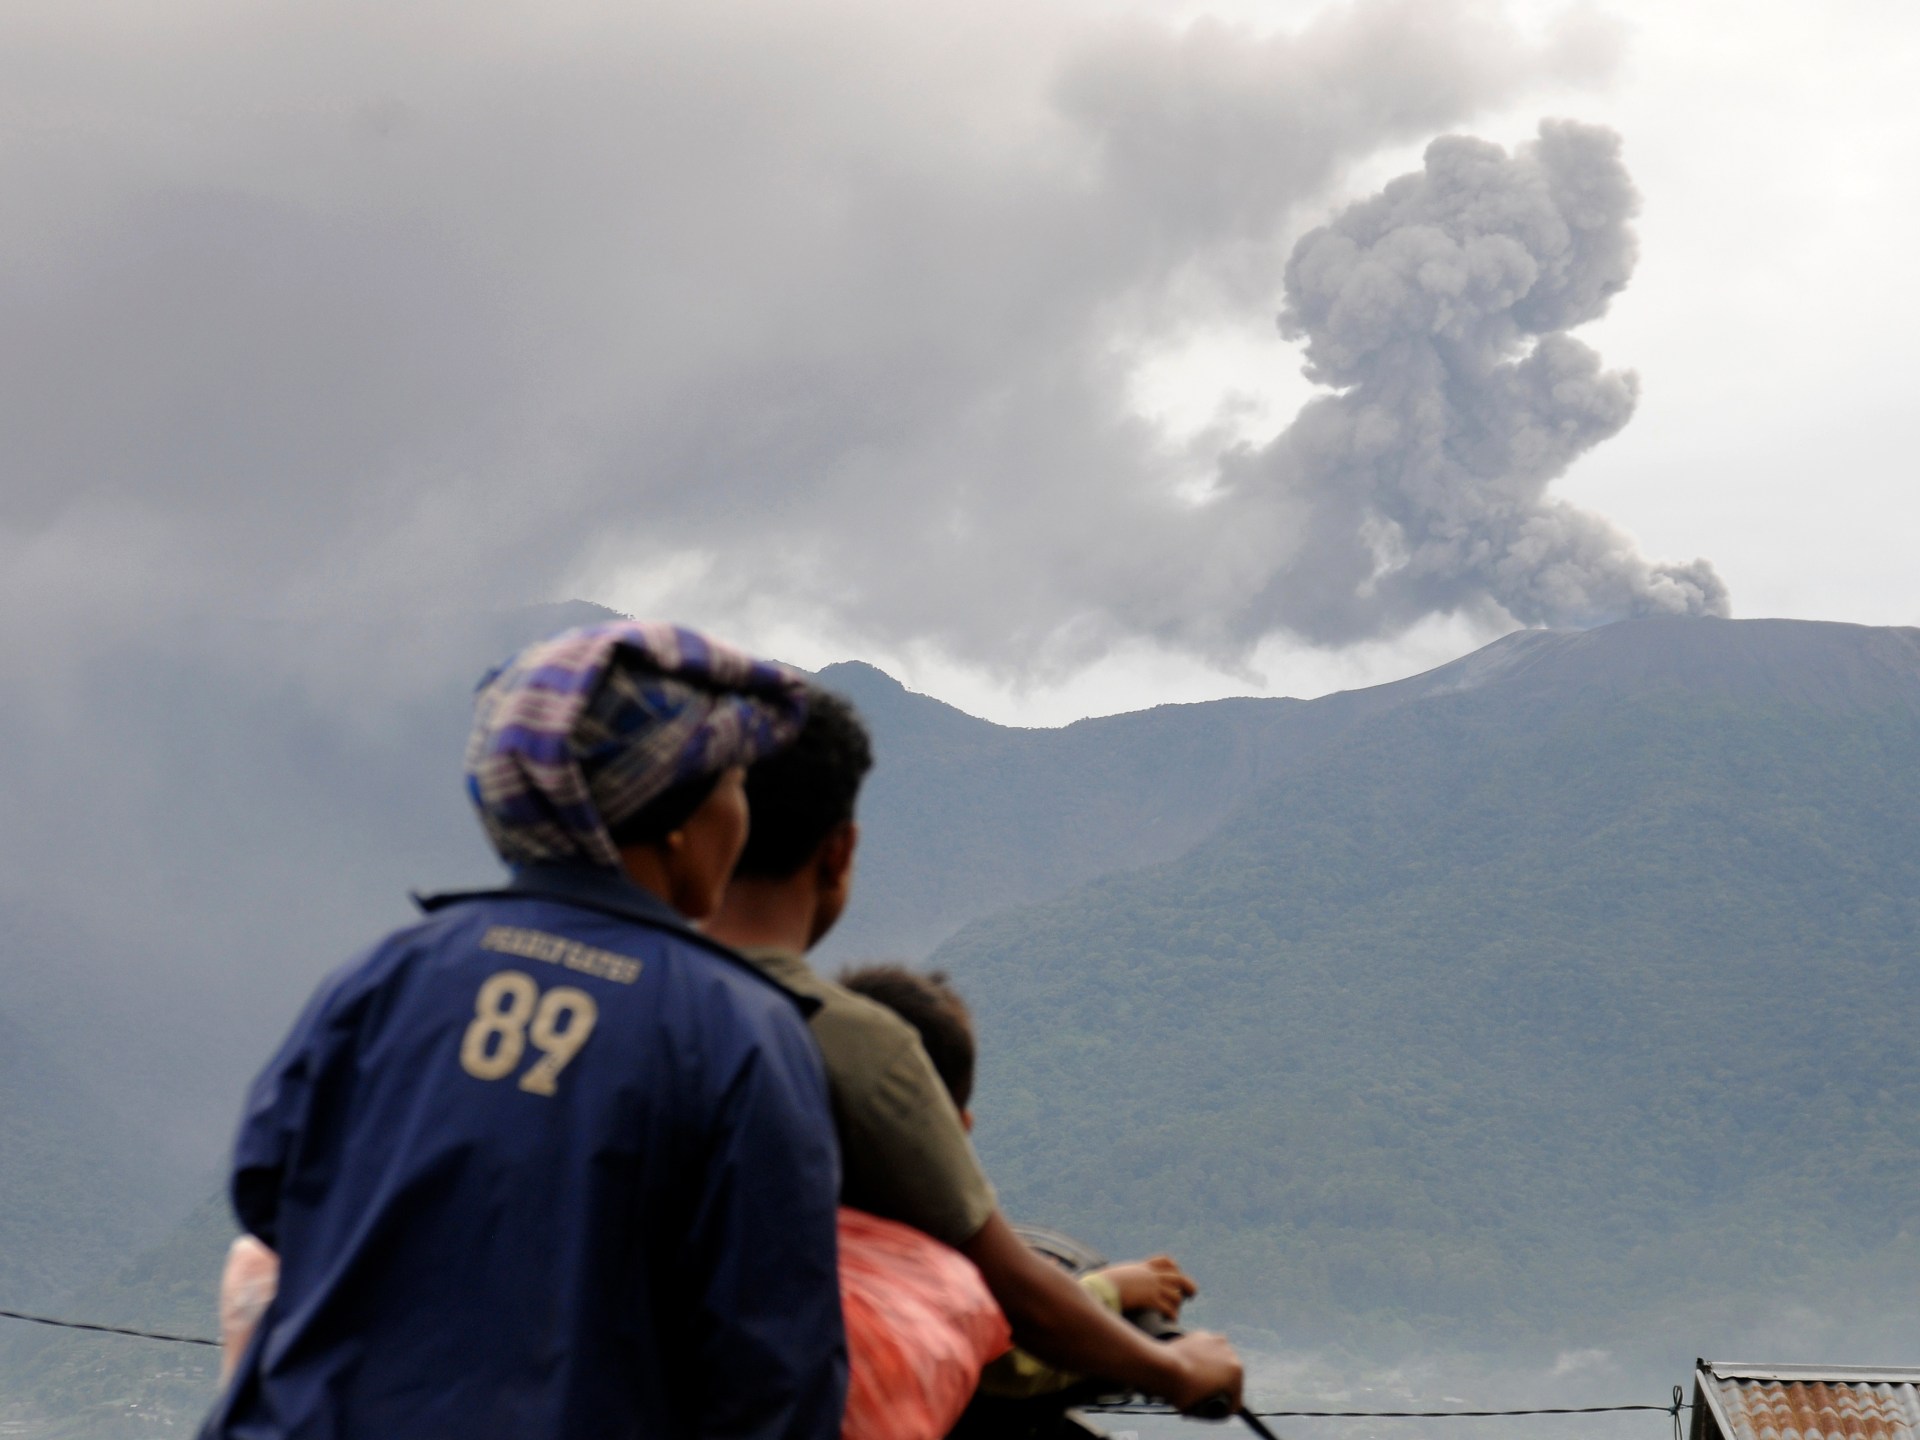 Death toll rises to 13 after Mount Marapi eruption, climbers still missing | Volcanoes News #Death #toll #rises #Mount #Marapi #eruption #climbers #missing #Volcanoes #News